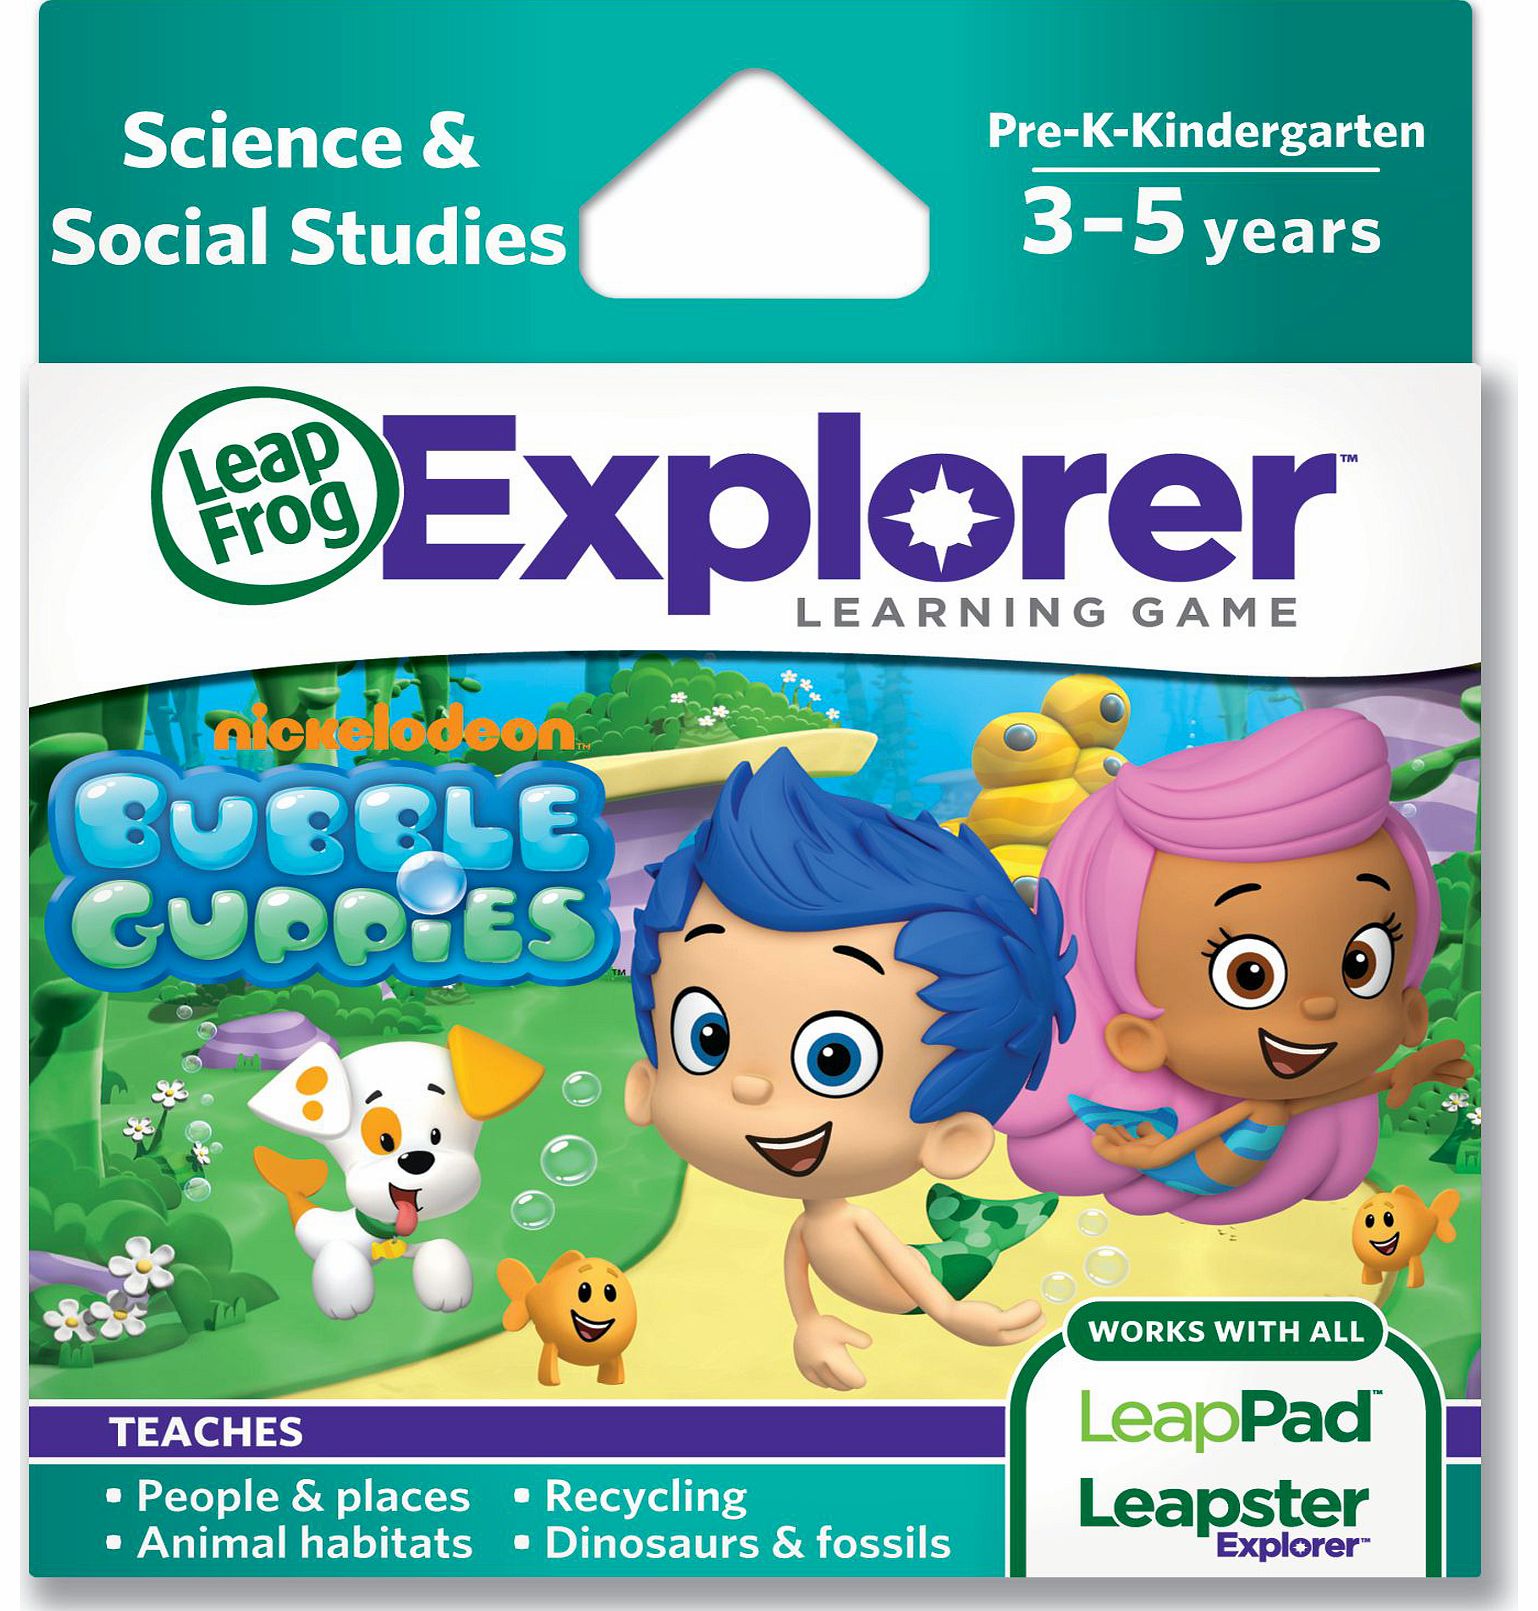 LeapFrog Explorer Learning Game - Bubble Guppies